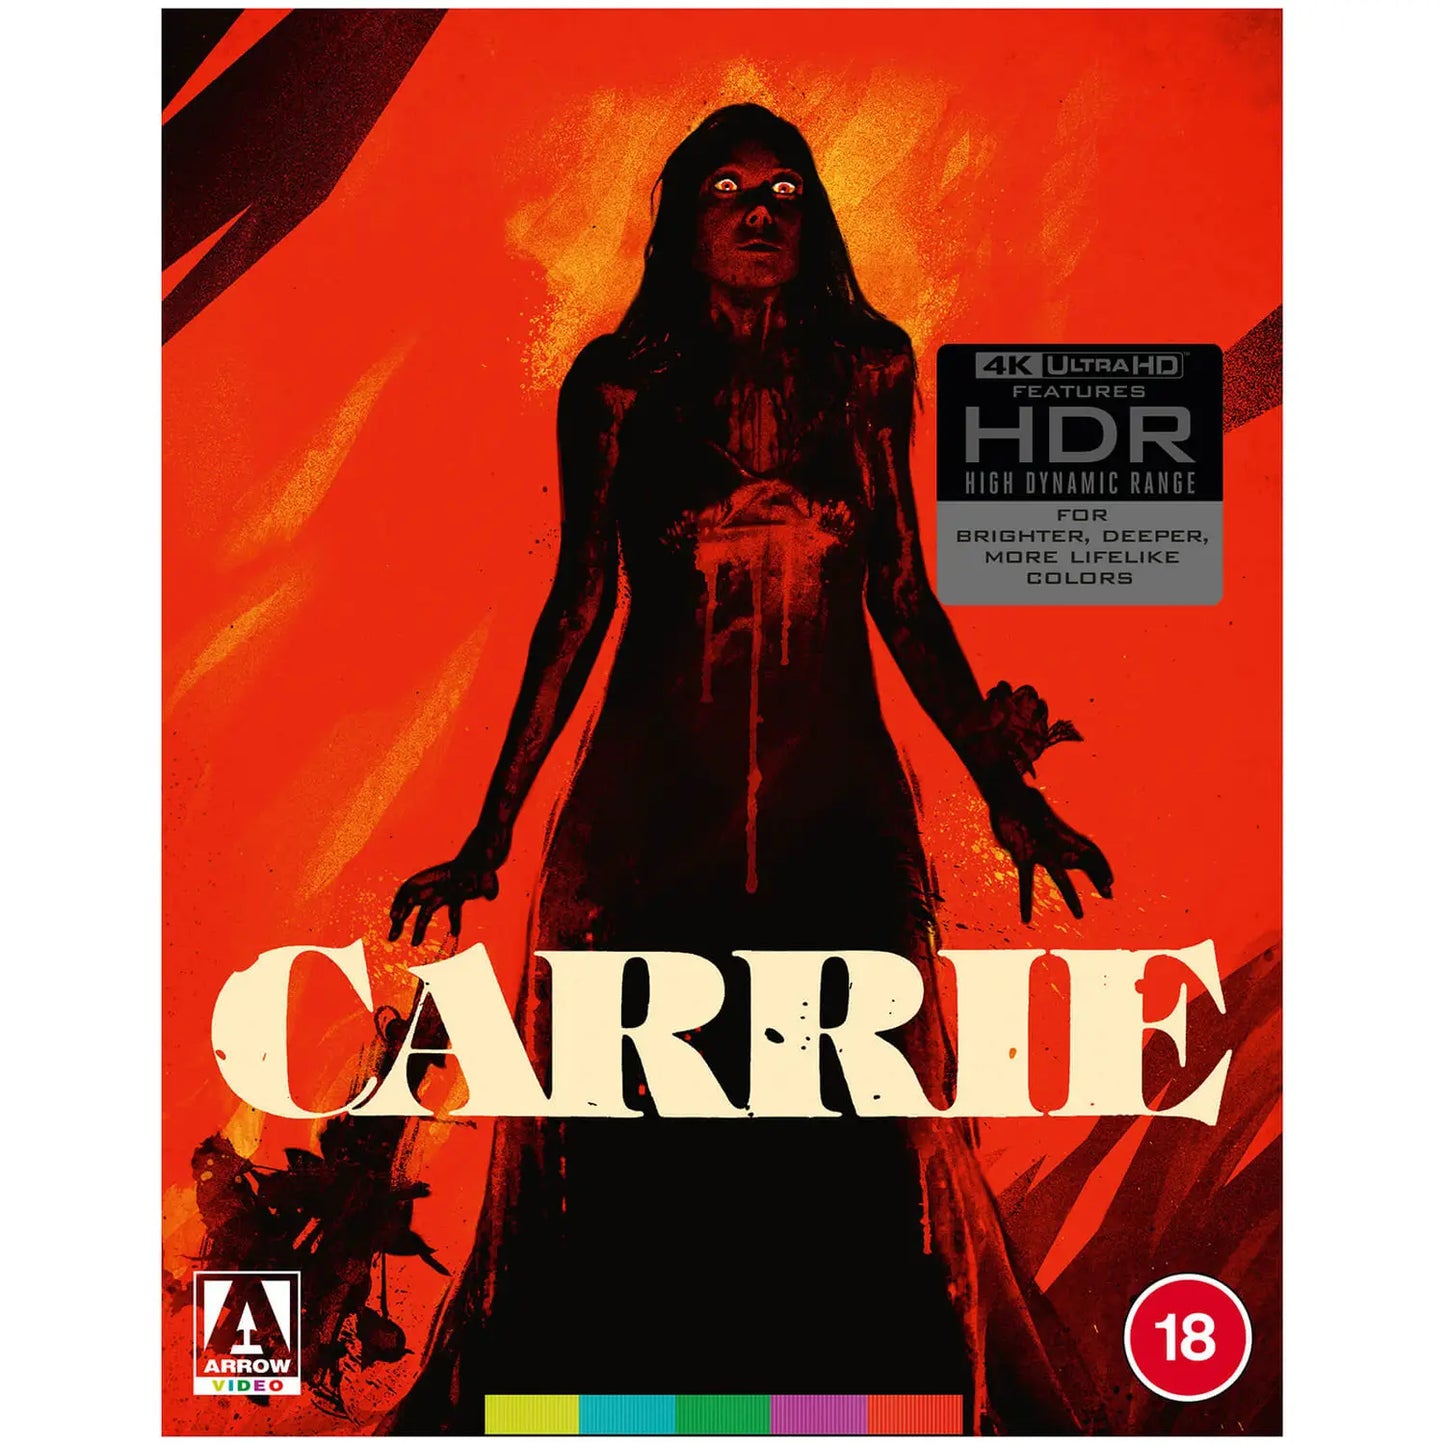 Carrie Limited Edition 4K UHD with Slip (Arrow UK)